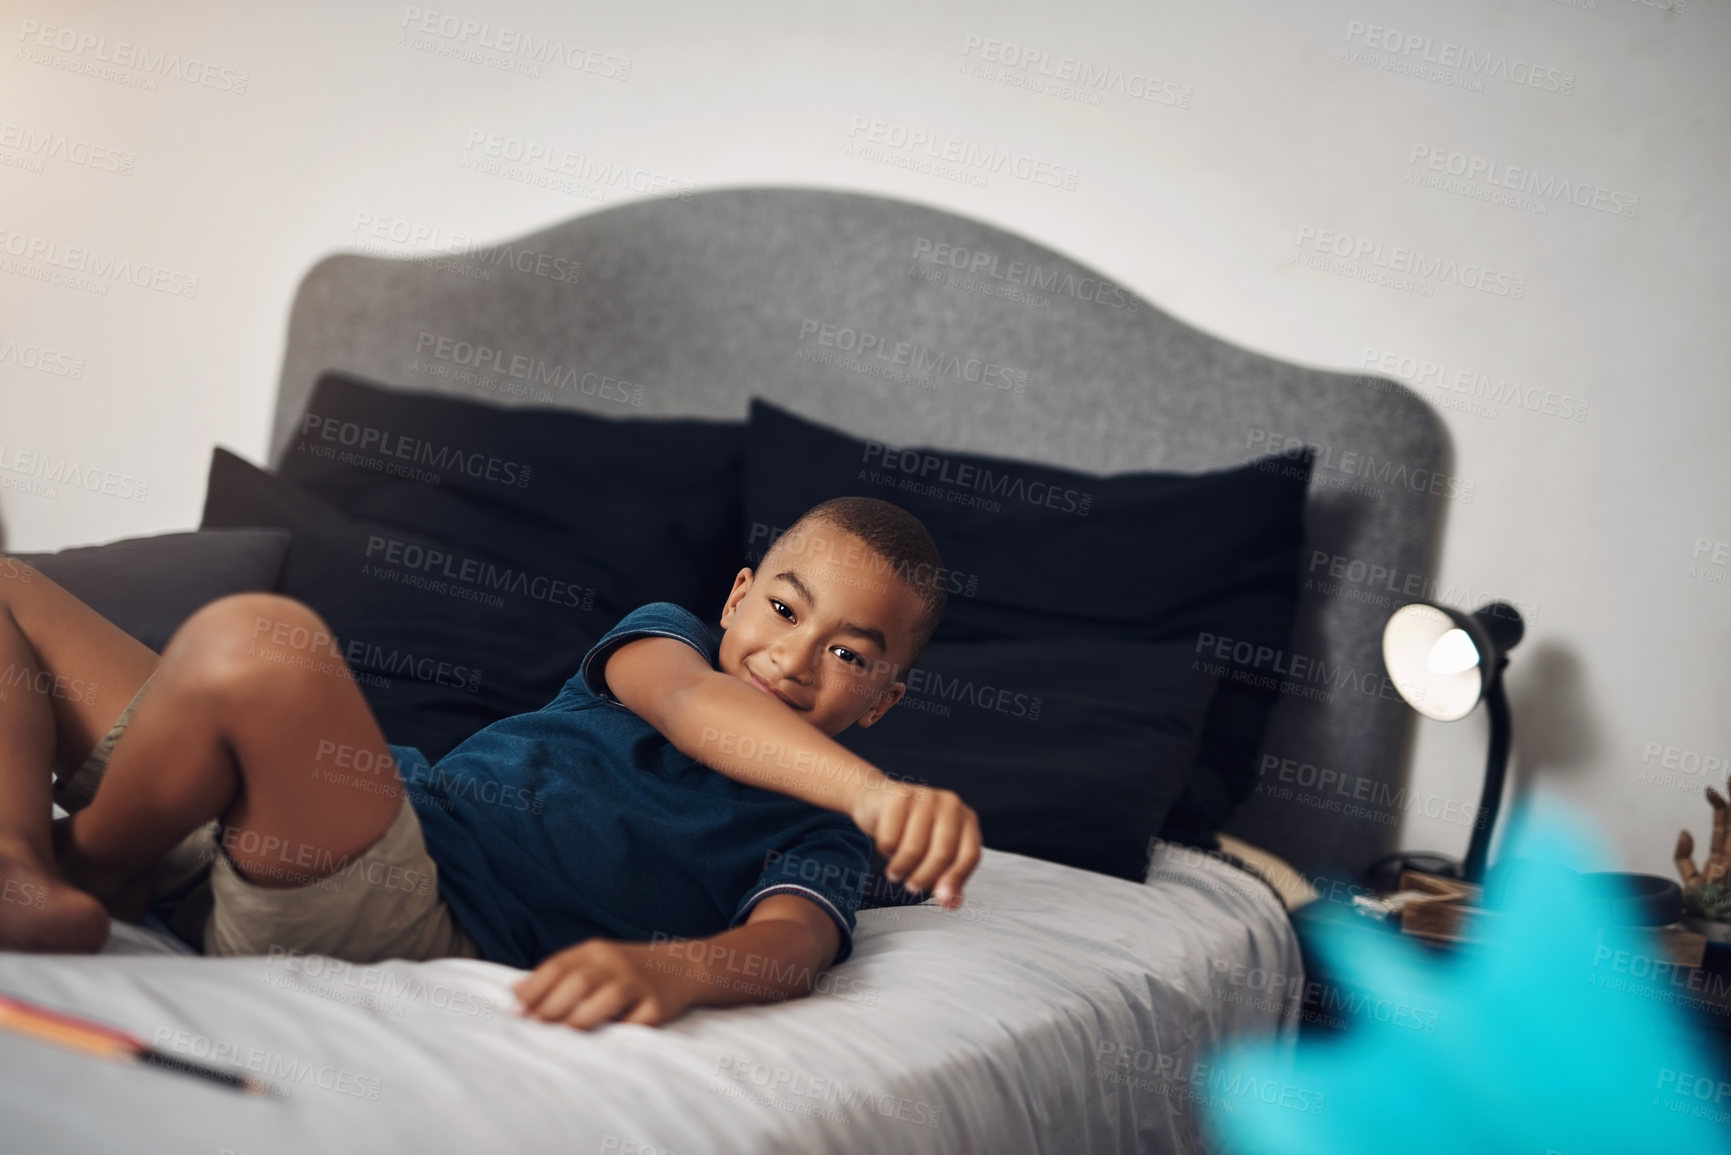 Buy stock photo Shot of a young boy lying on his bed